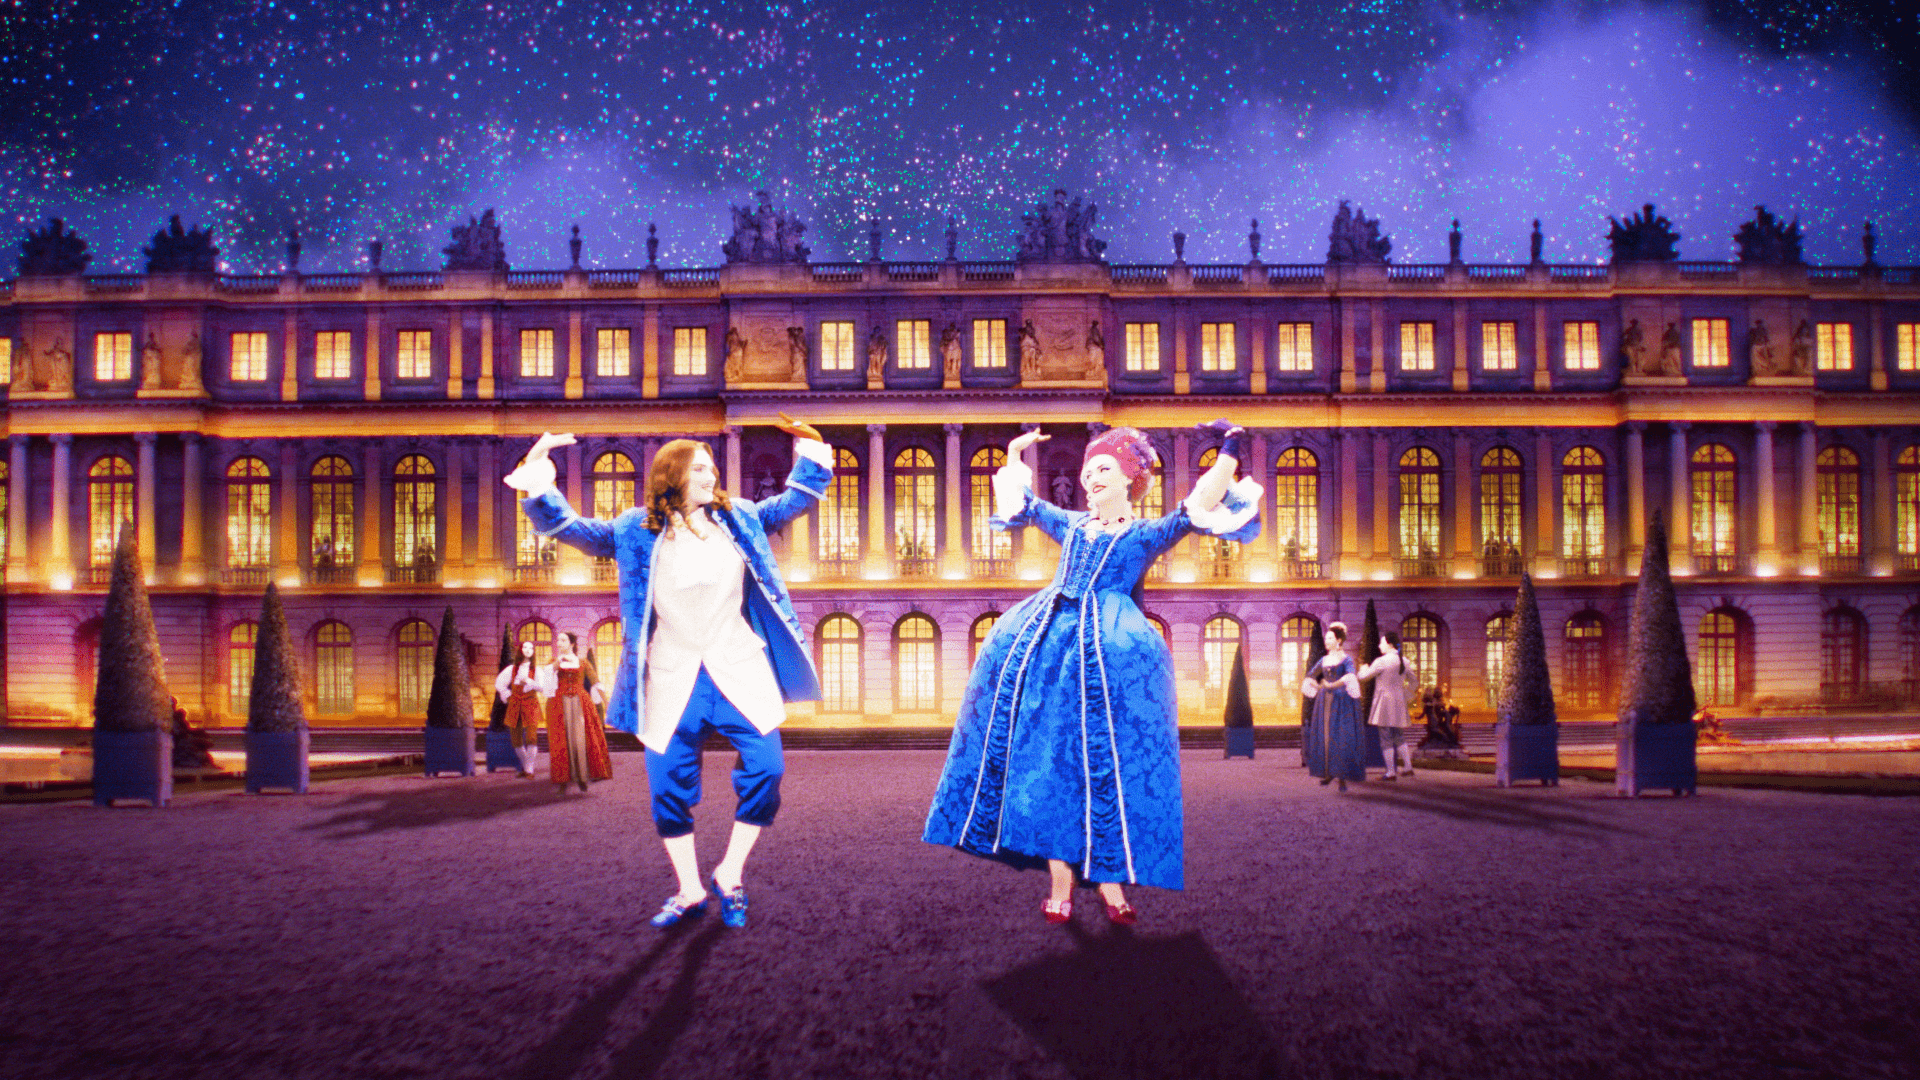 JD24_A_Night_In_The_Chateau_De_Versailles_Screen_01